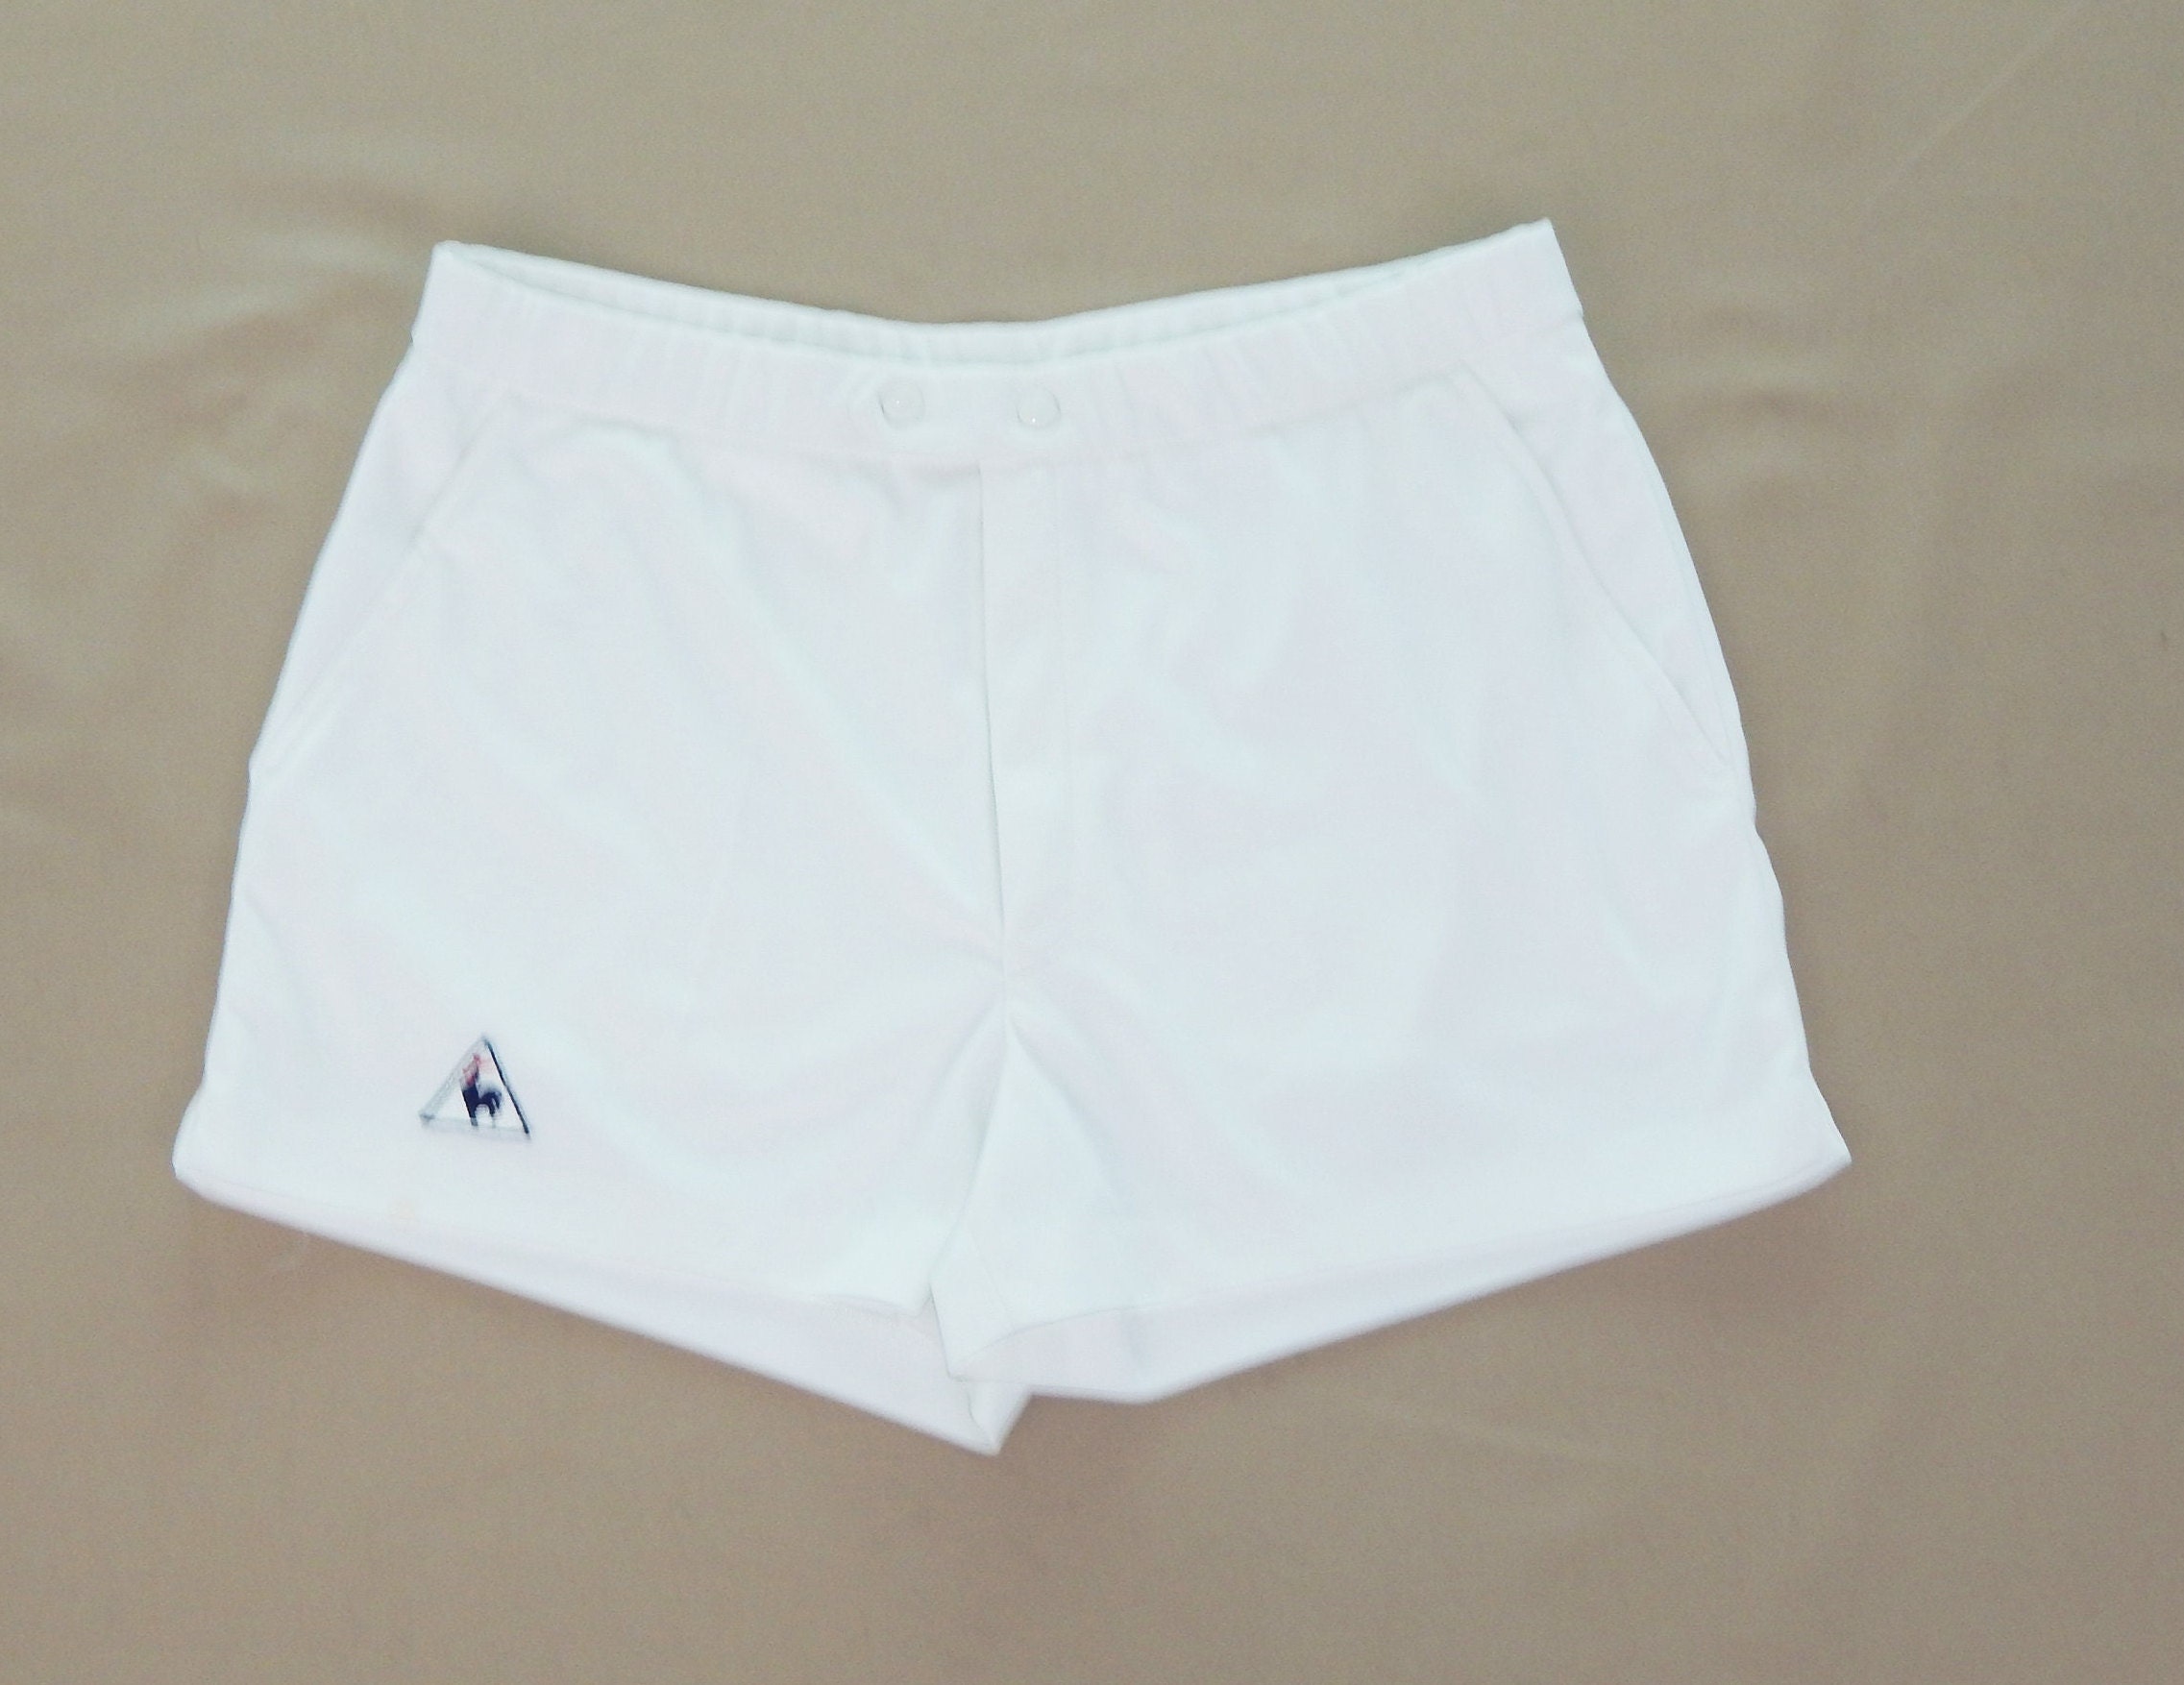 VINTAGE LE COQ SPORTIF TEMPLATE 1980'S WHITE FOOTBALL SHORTS JERSEY  SIZE L ADULT